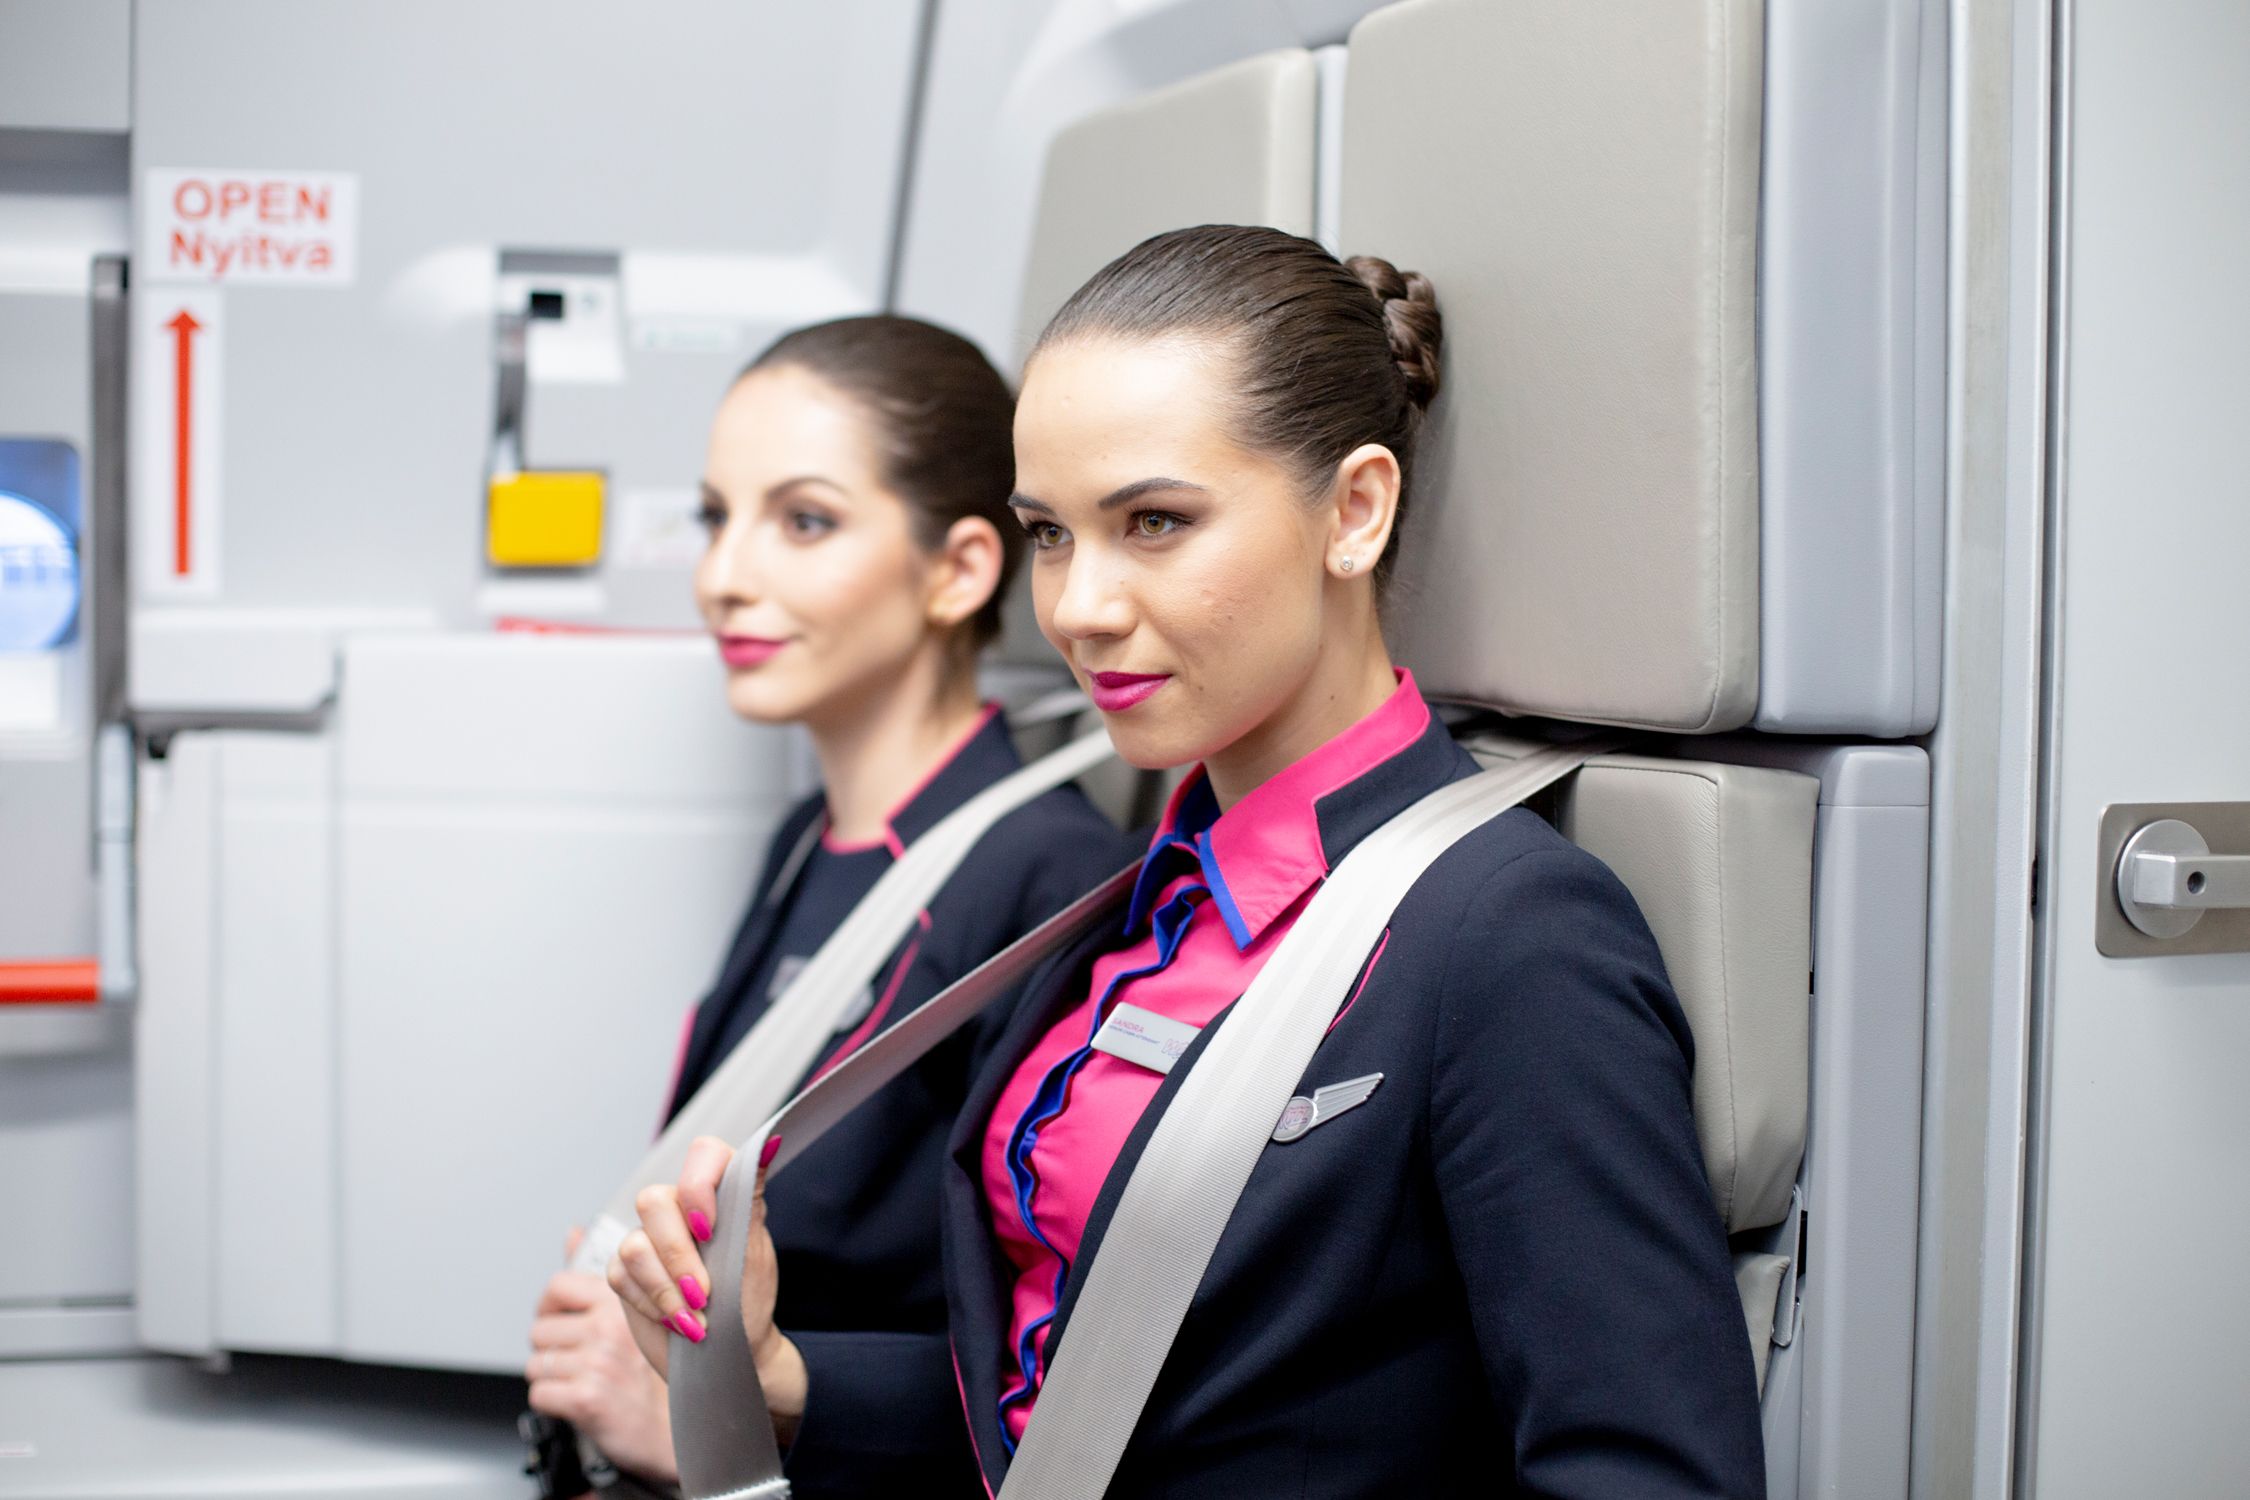 Wizz Air cabin crew on jump seats.